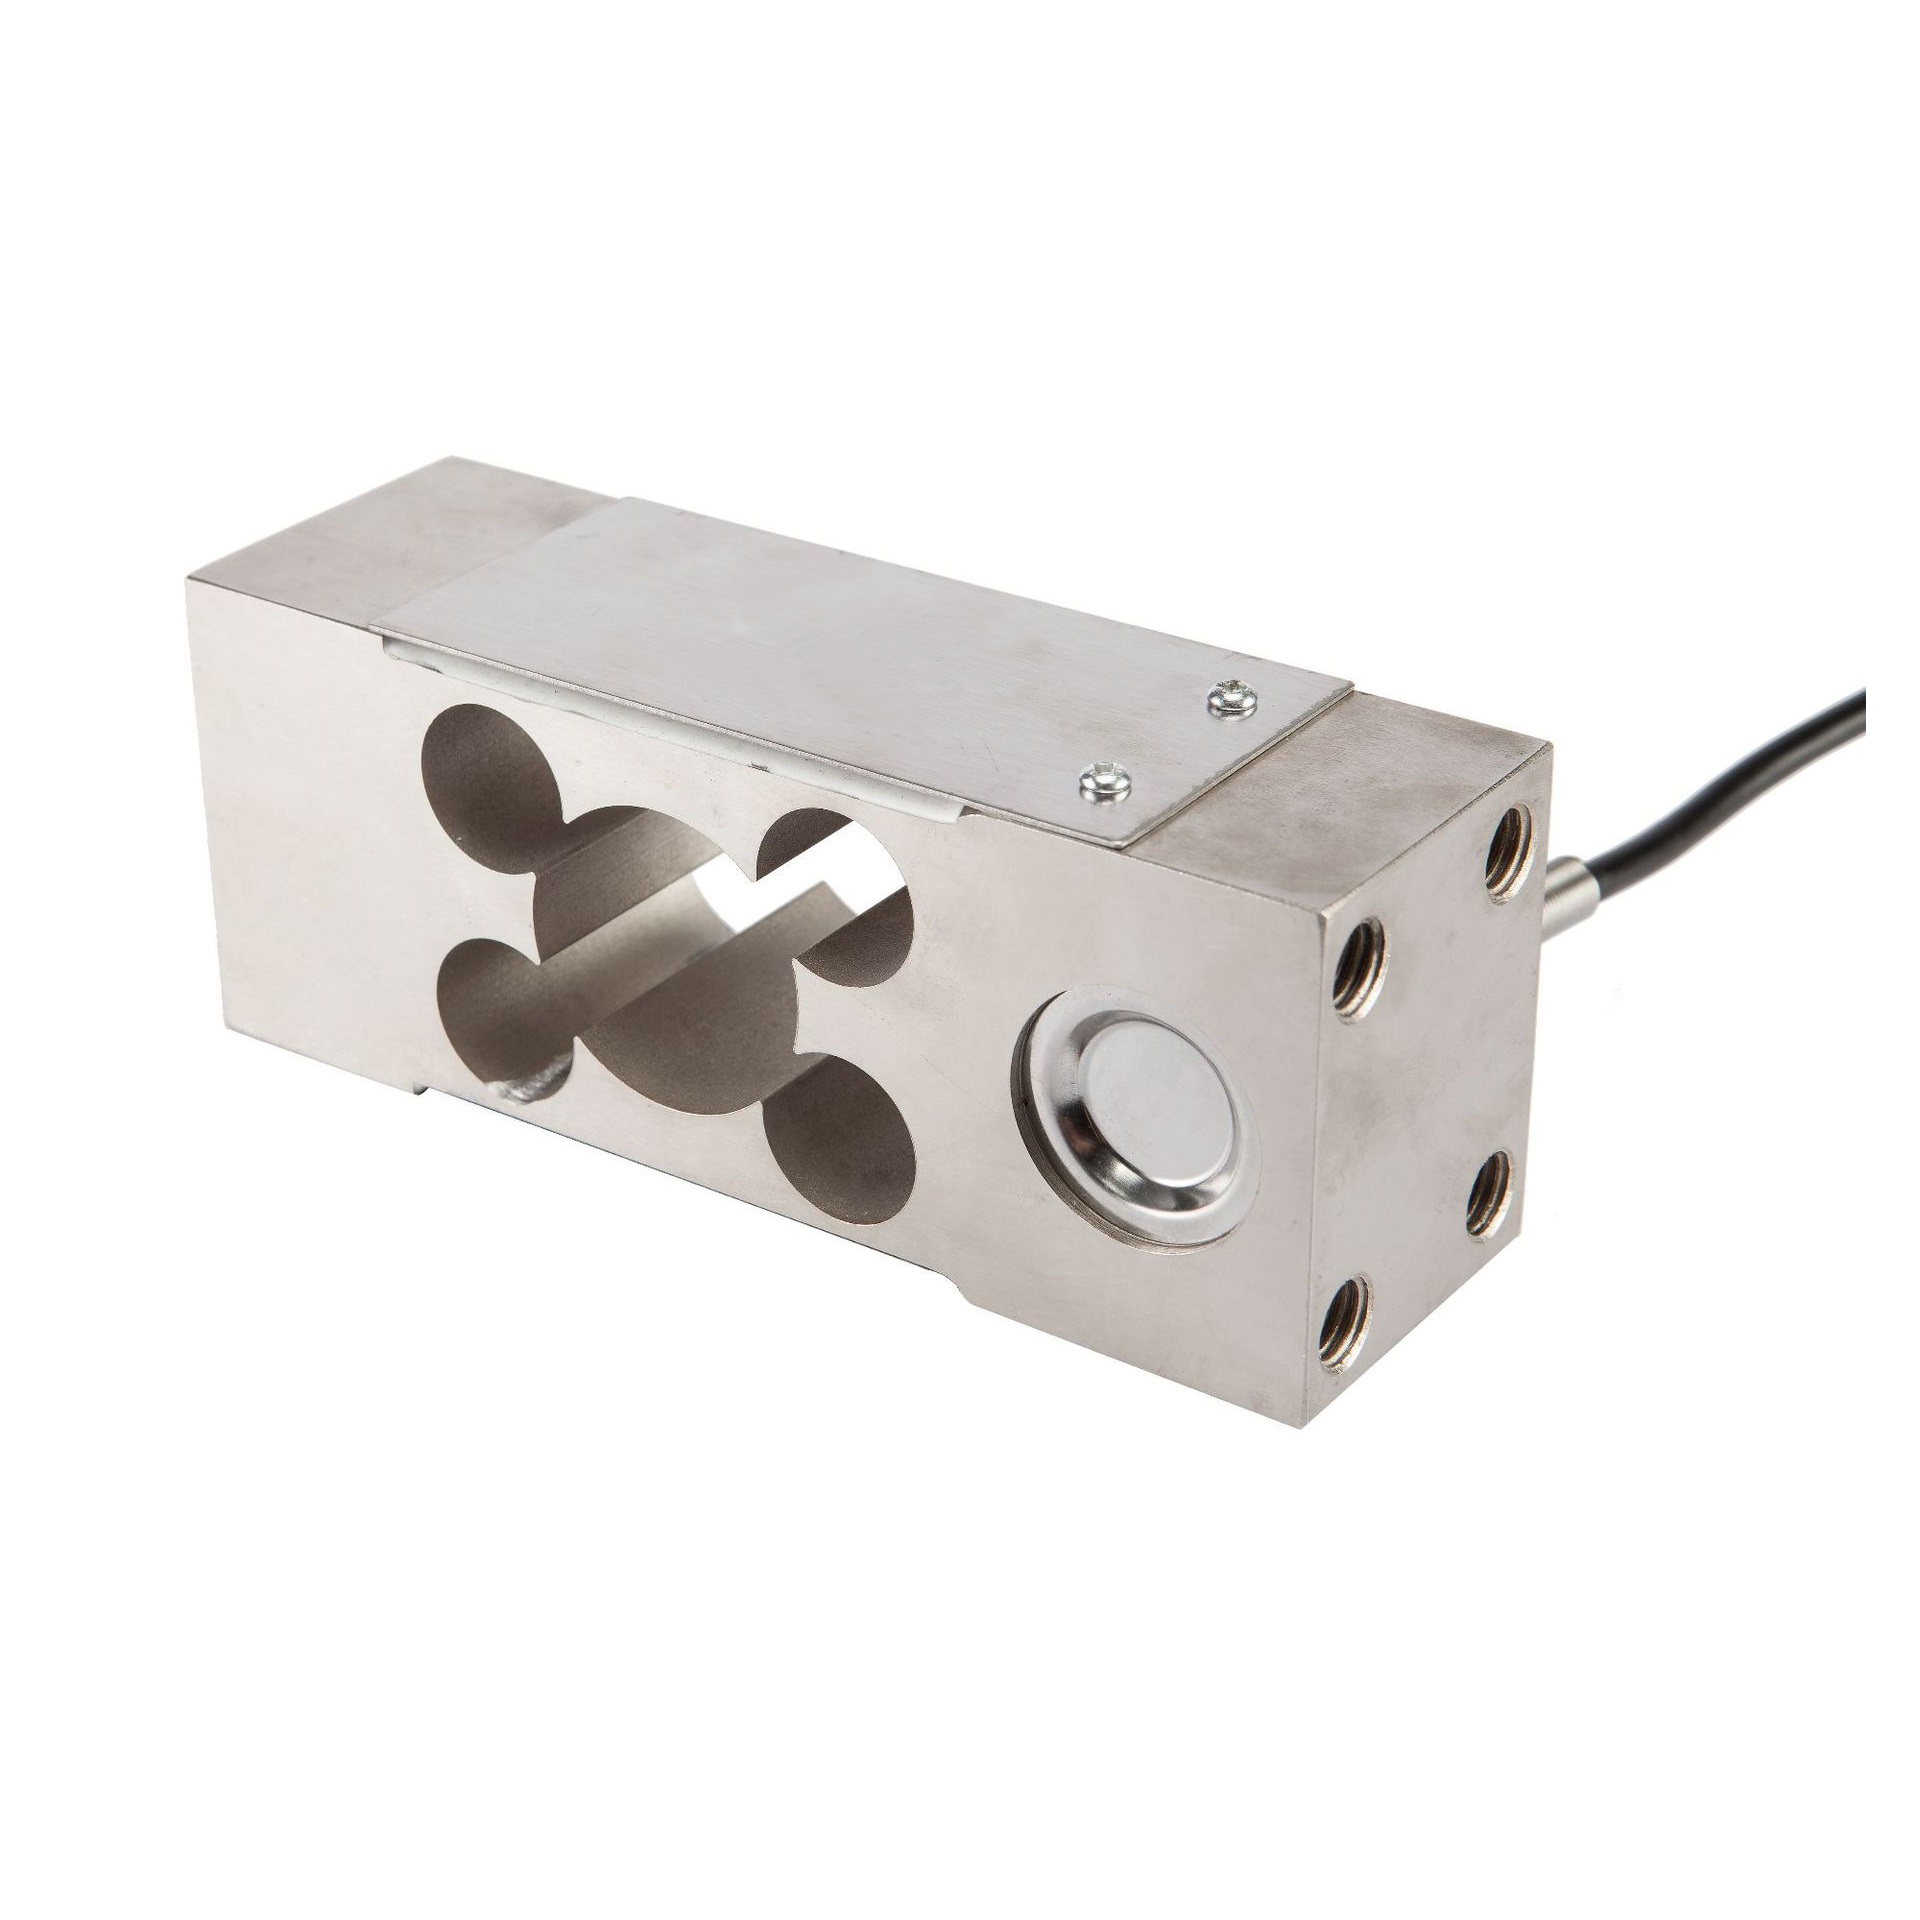 LC361 Low Cost Small Shear Beam Weight Sensor Single Point Load Cells for Conveyor Belt